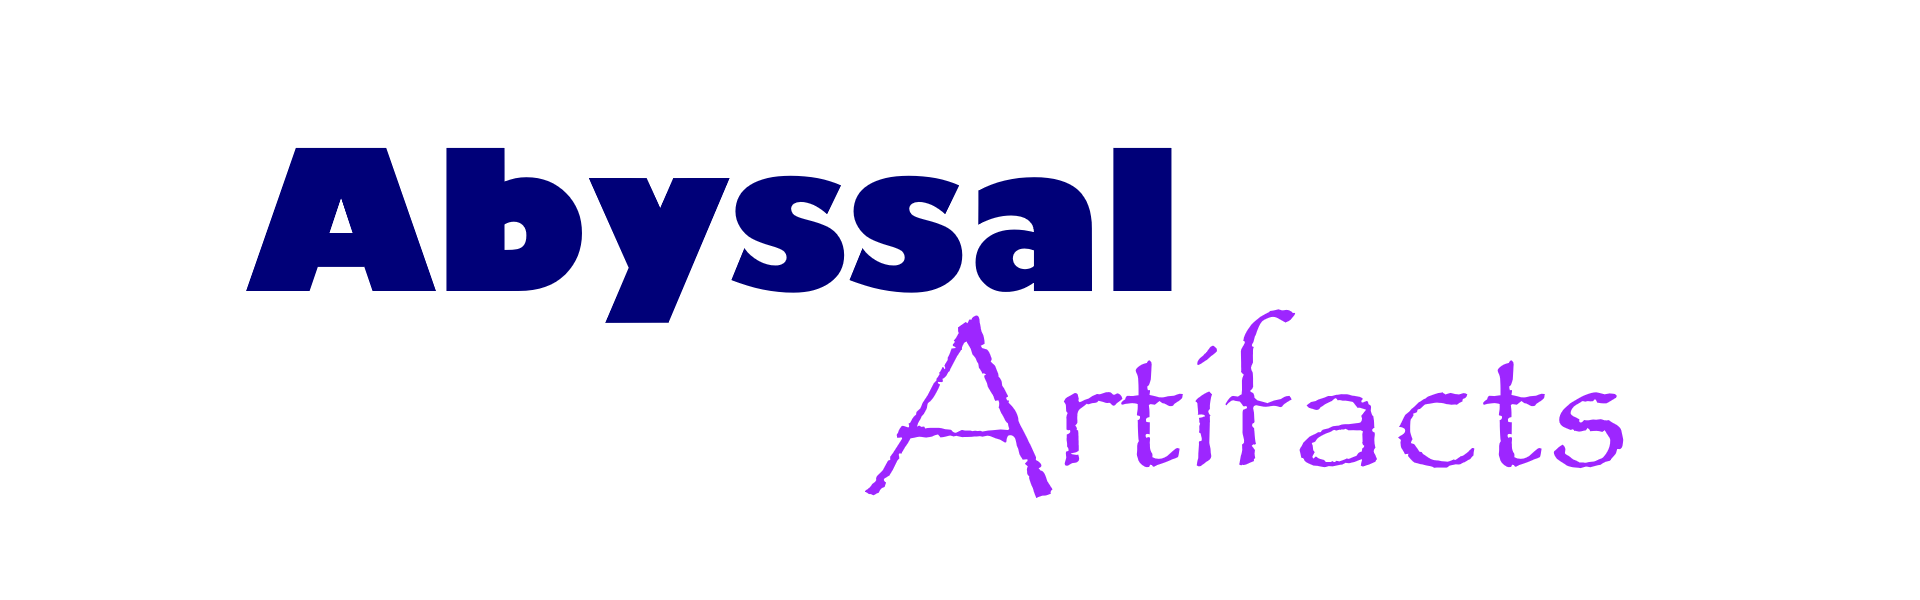 Abyssal Artifacts